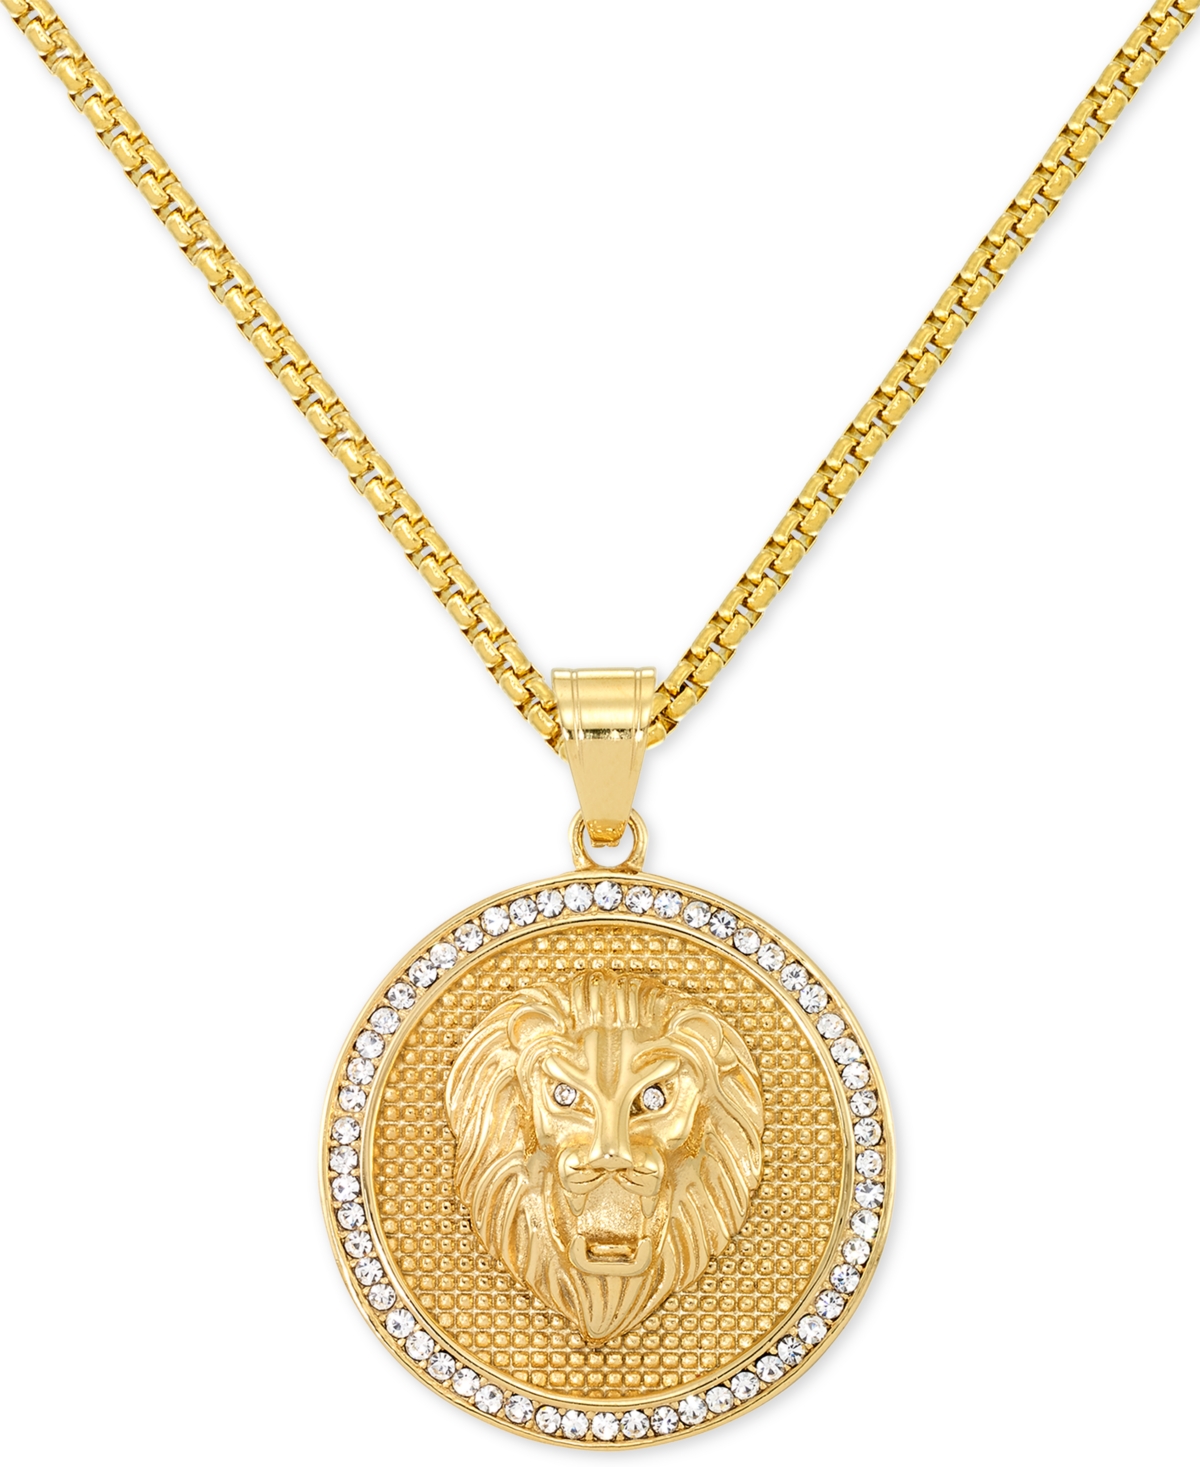 Legacy for Men by Simone I. Smith Men's Crystal Lion Medallion 24" Pendant Necklace in Yellow Ion-Plated Stainless Steel